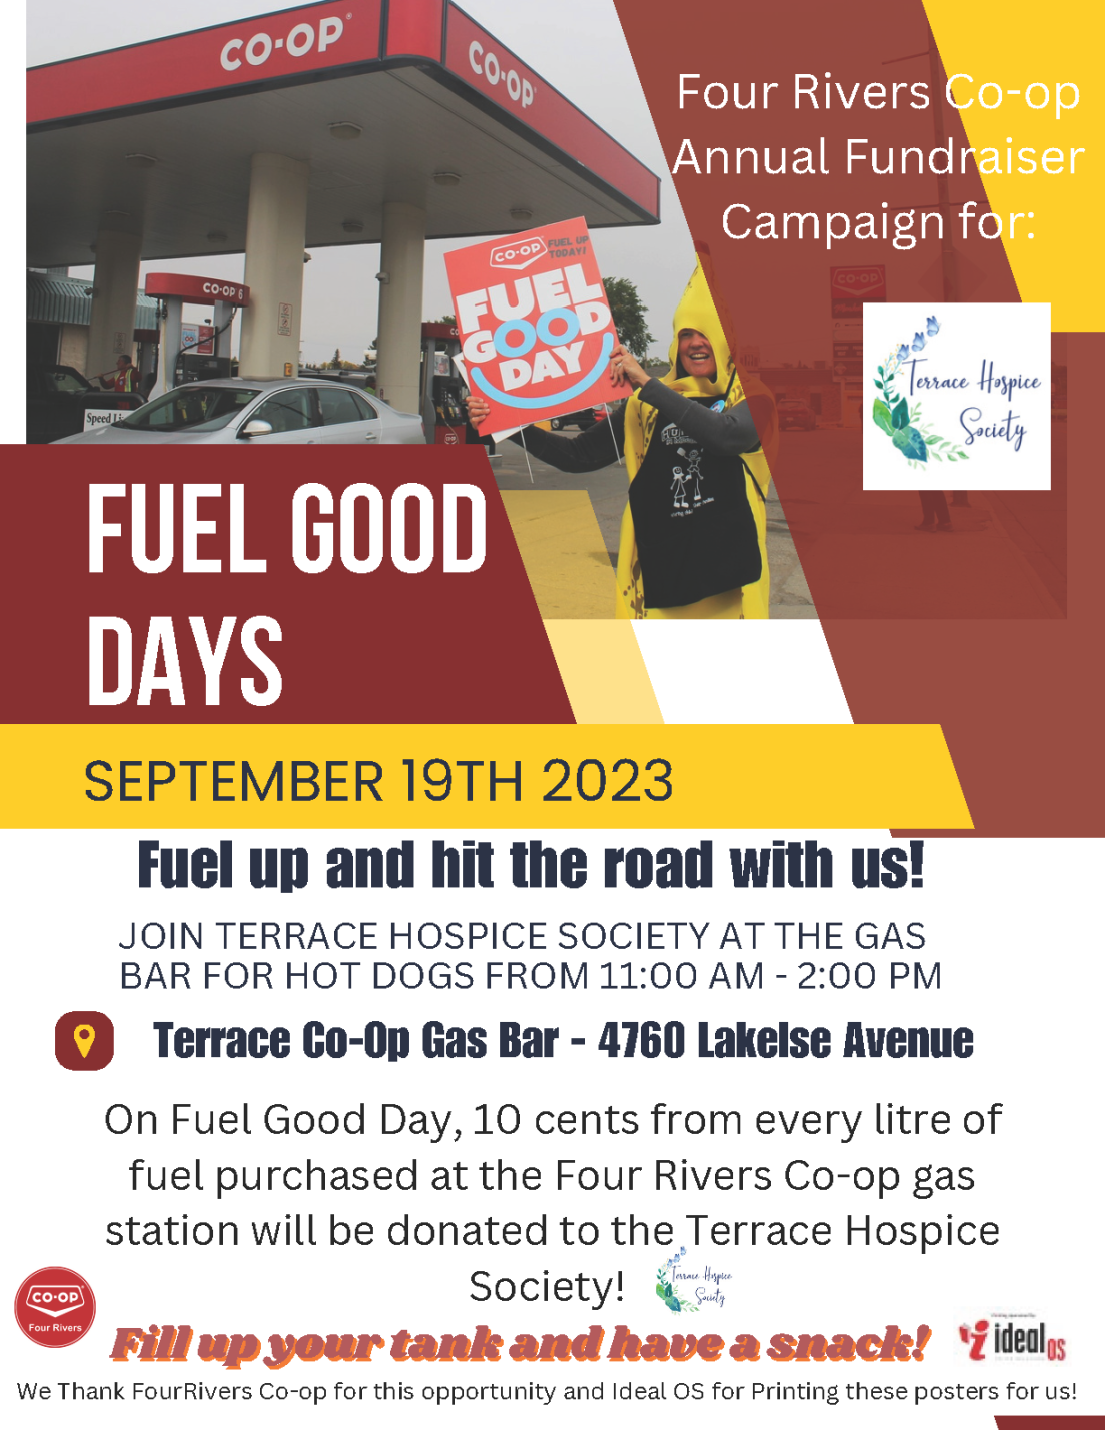 Poster with event info and image of gas station holding this event